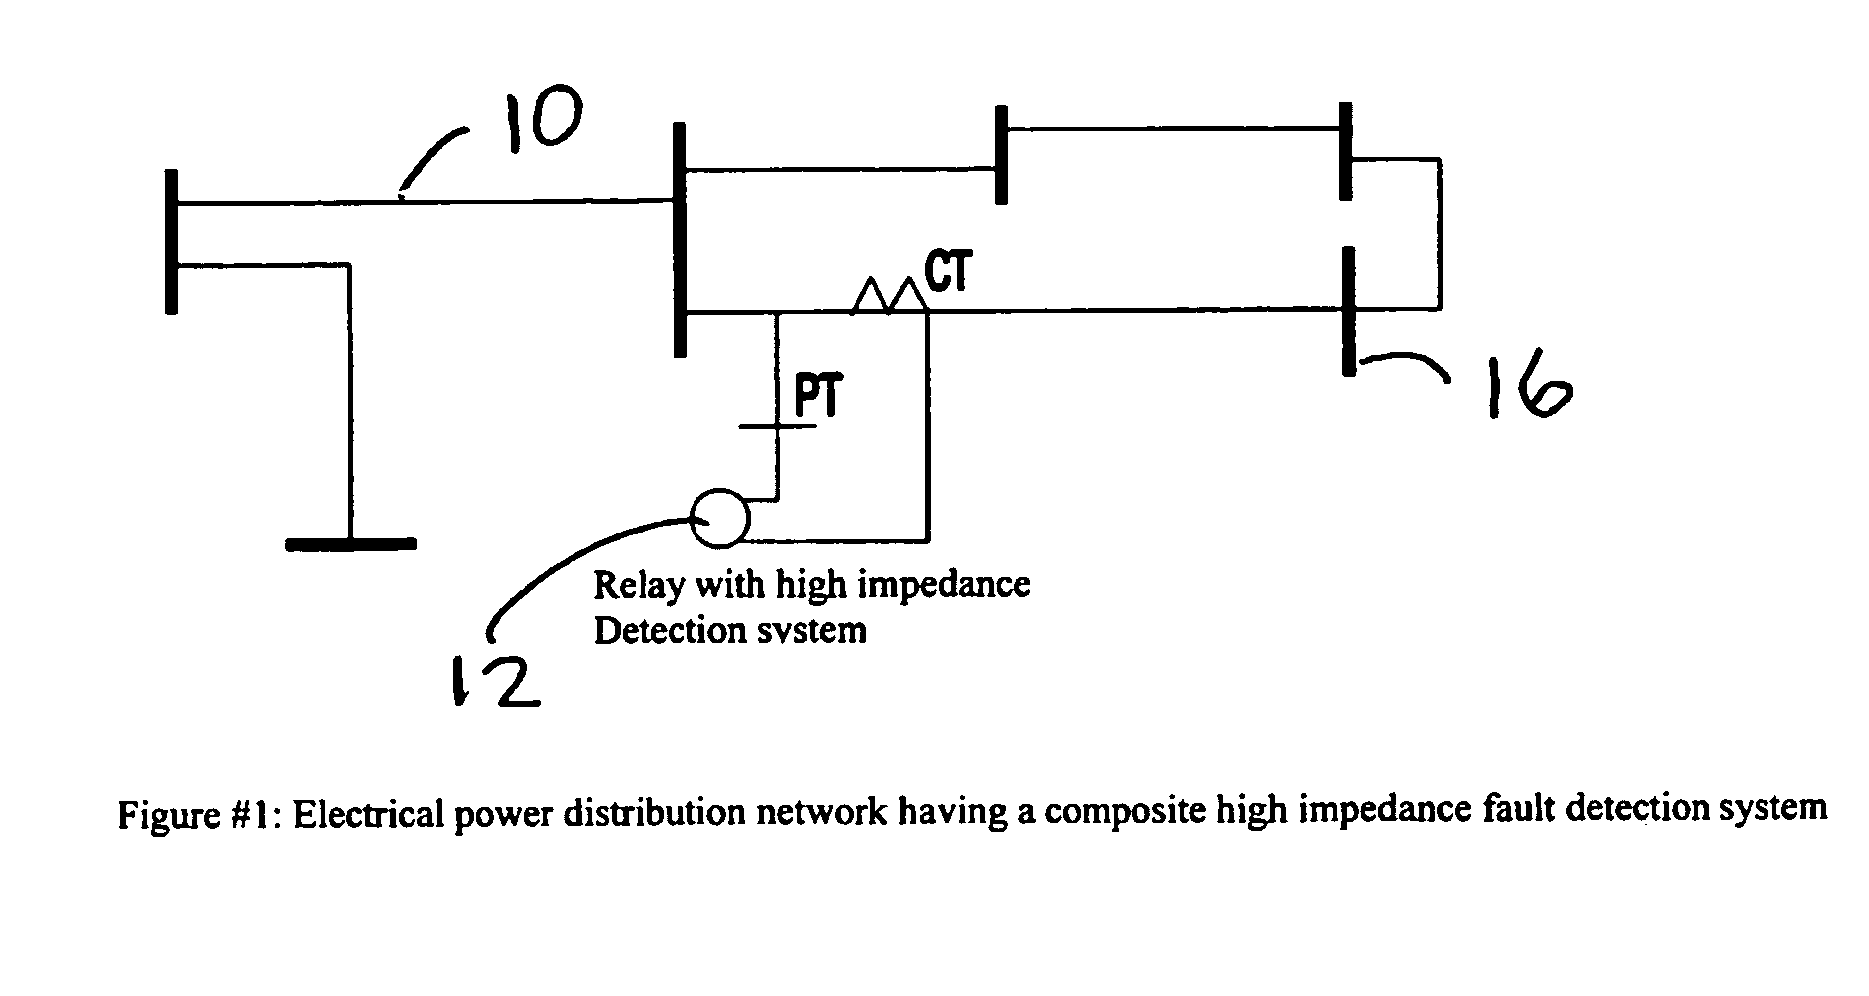 High impedance fault detection